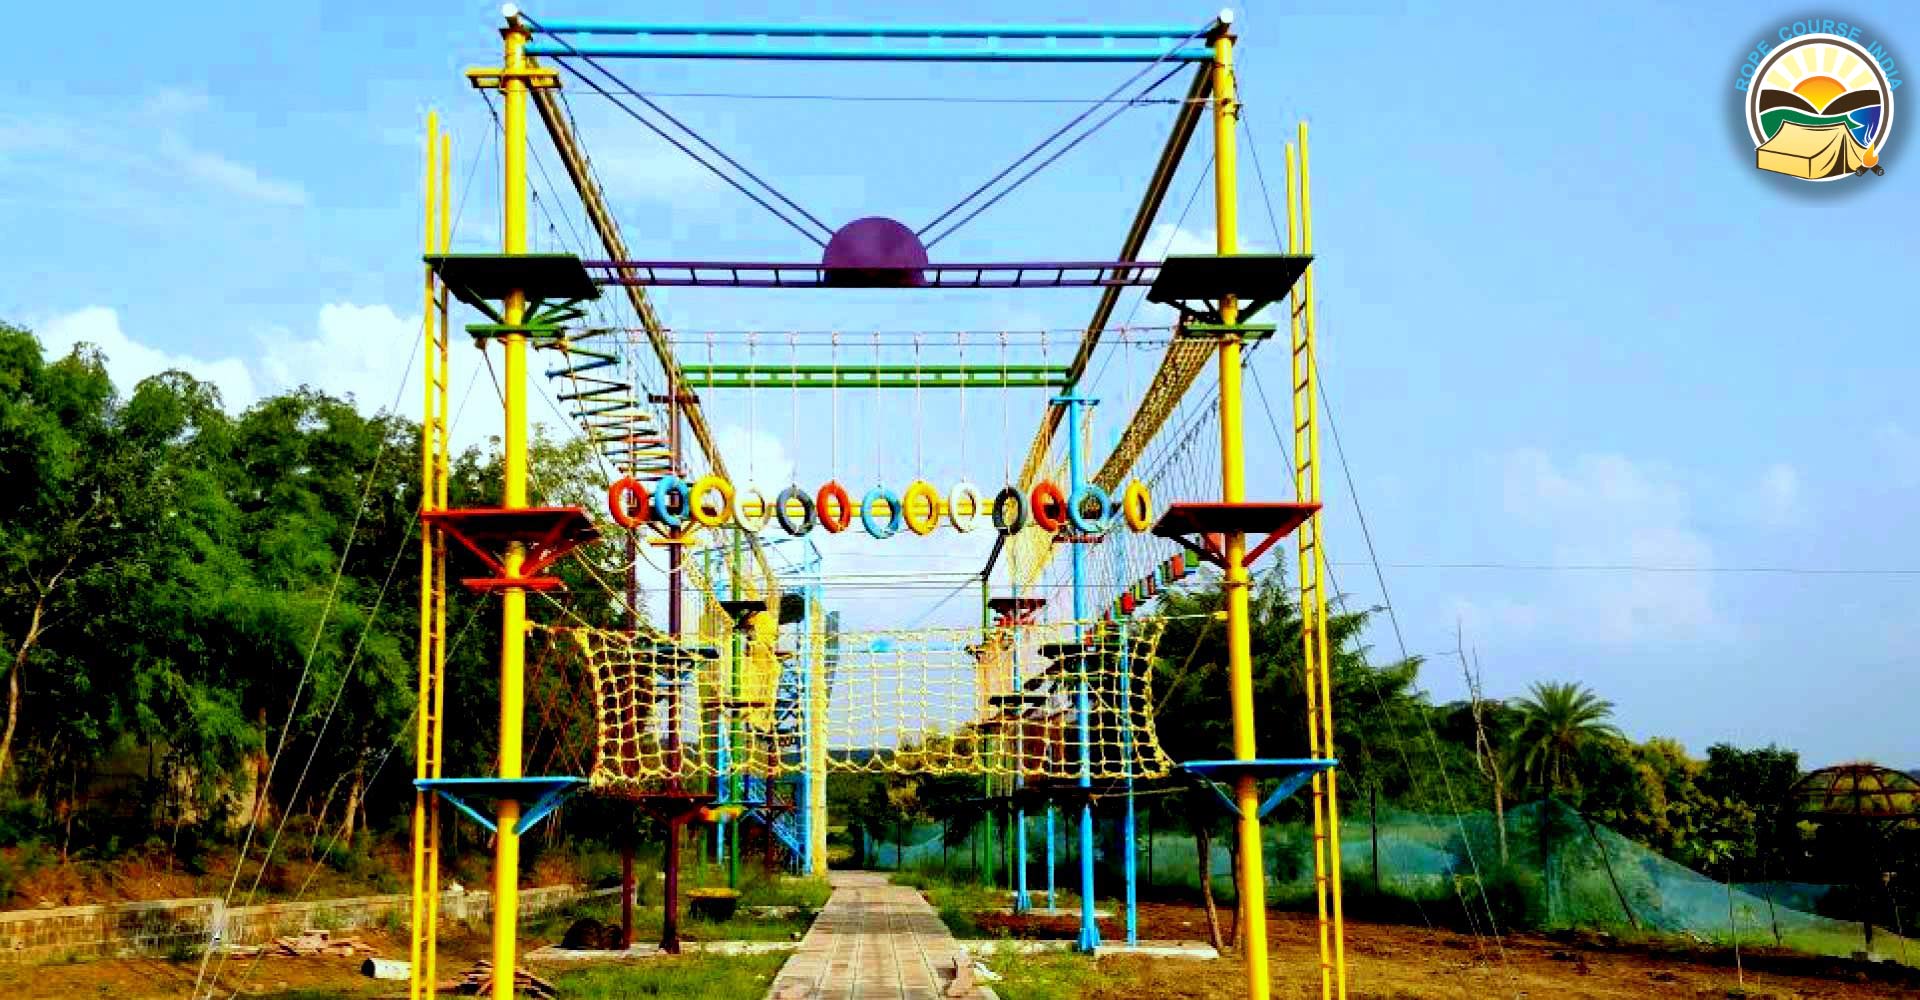 Rope course Construction In India